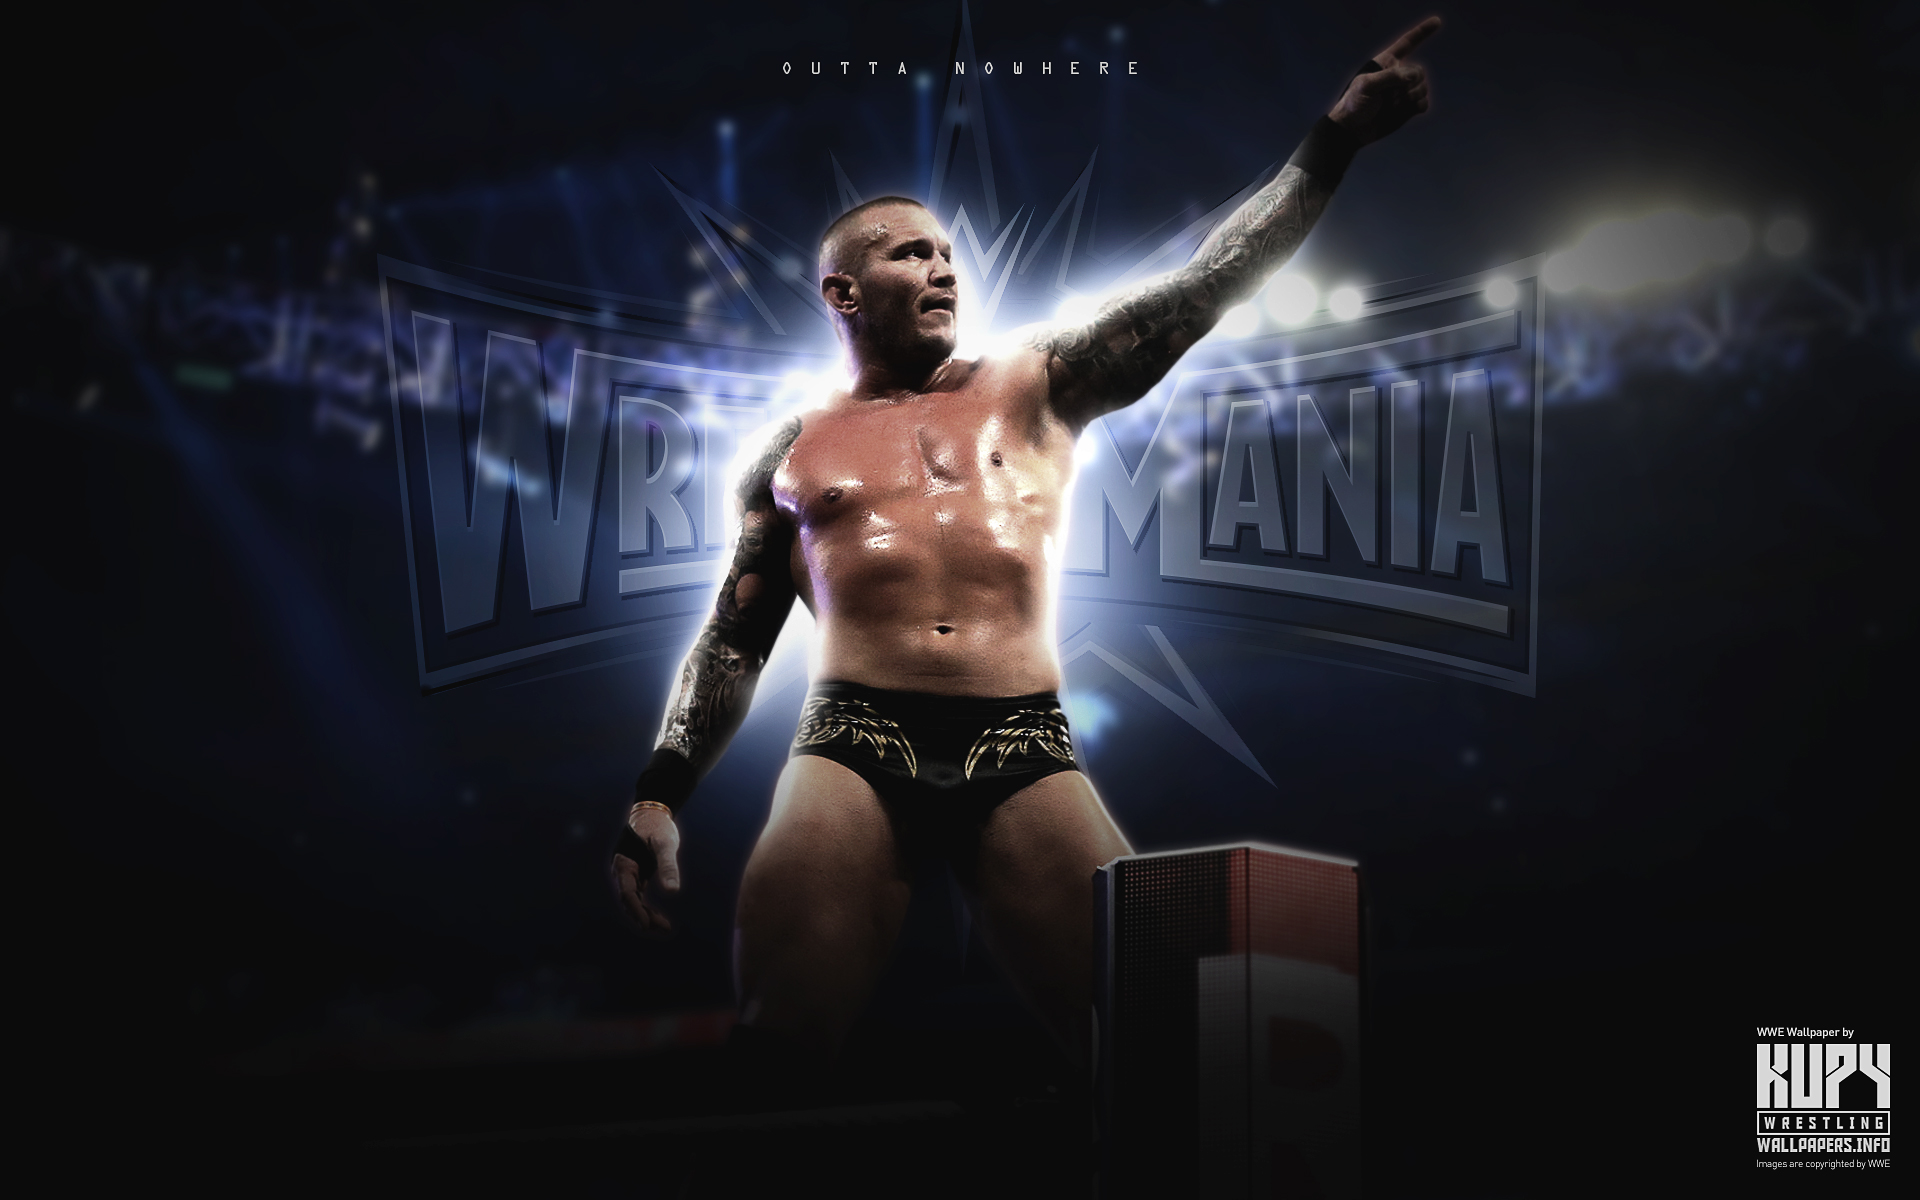 Kupy Wrestling Wallpapers The Latest Source For Your Wwe Wrestling Wallpaper Needs Mobile Hd And 4k Resolutions Available Wwe Royal Rumble Archives Kupy Wrestling Wallpapers The Latest Source For